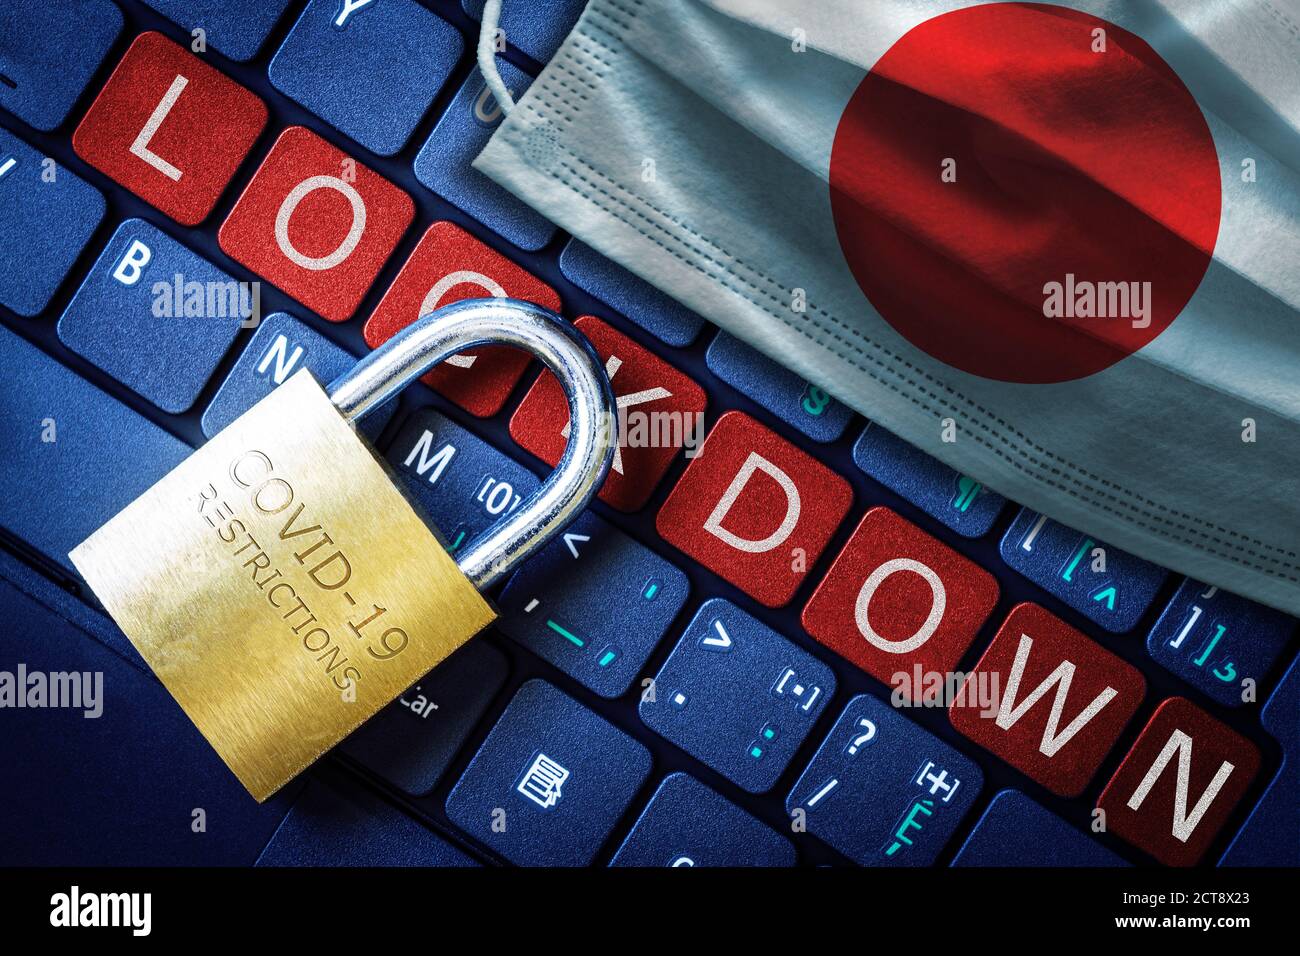 Japan COVID-19 coronavirus lockdown restrictions concept illustrated by padlock on laptop red alert keyboard buttons and face mask with Japanese flag. Stock Photo